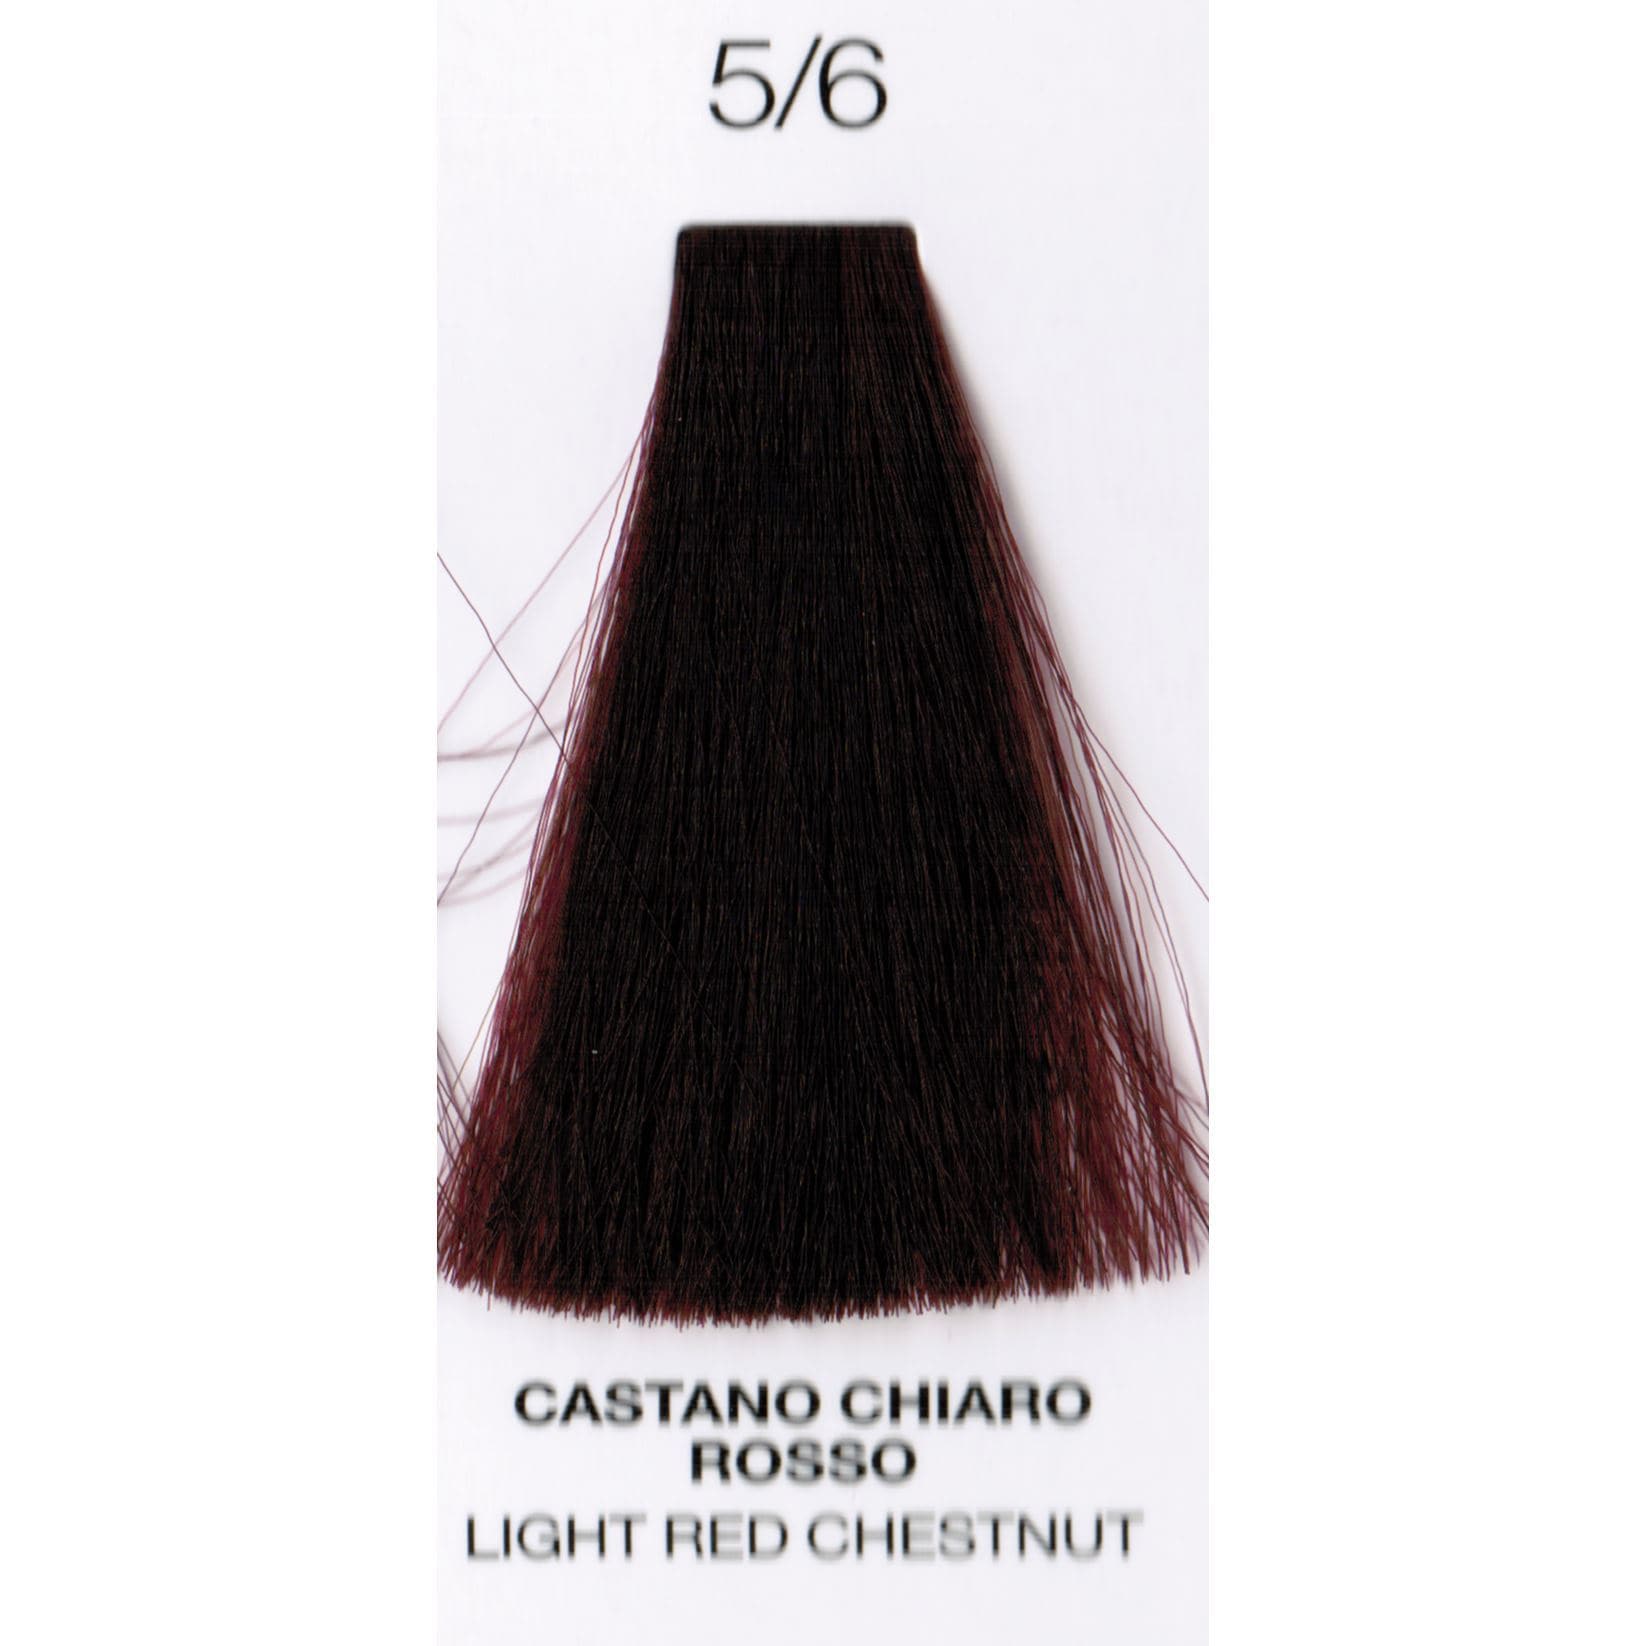 5/6 Light Red Chestnut | Purity | Ammonia-Free Permanent Hair Color HAIR COLOR OYSTER 